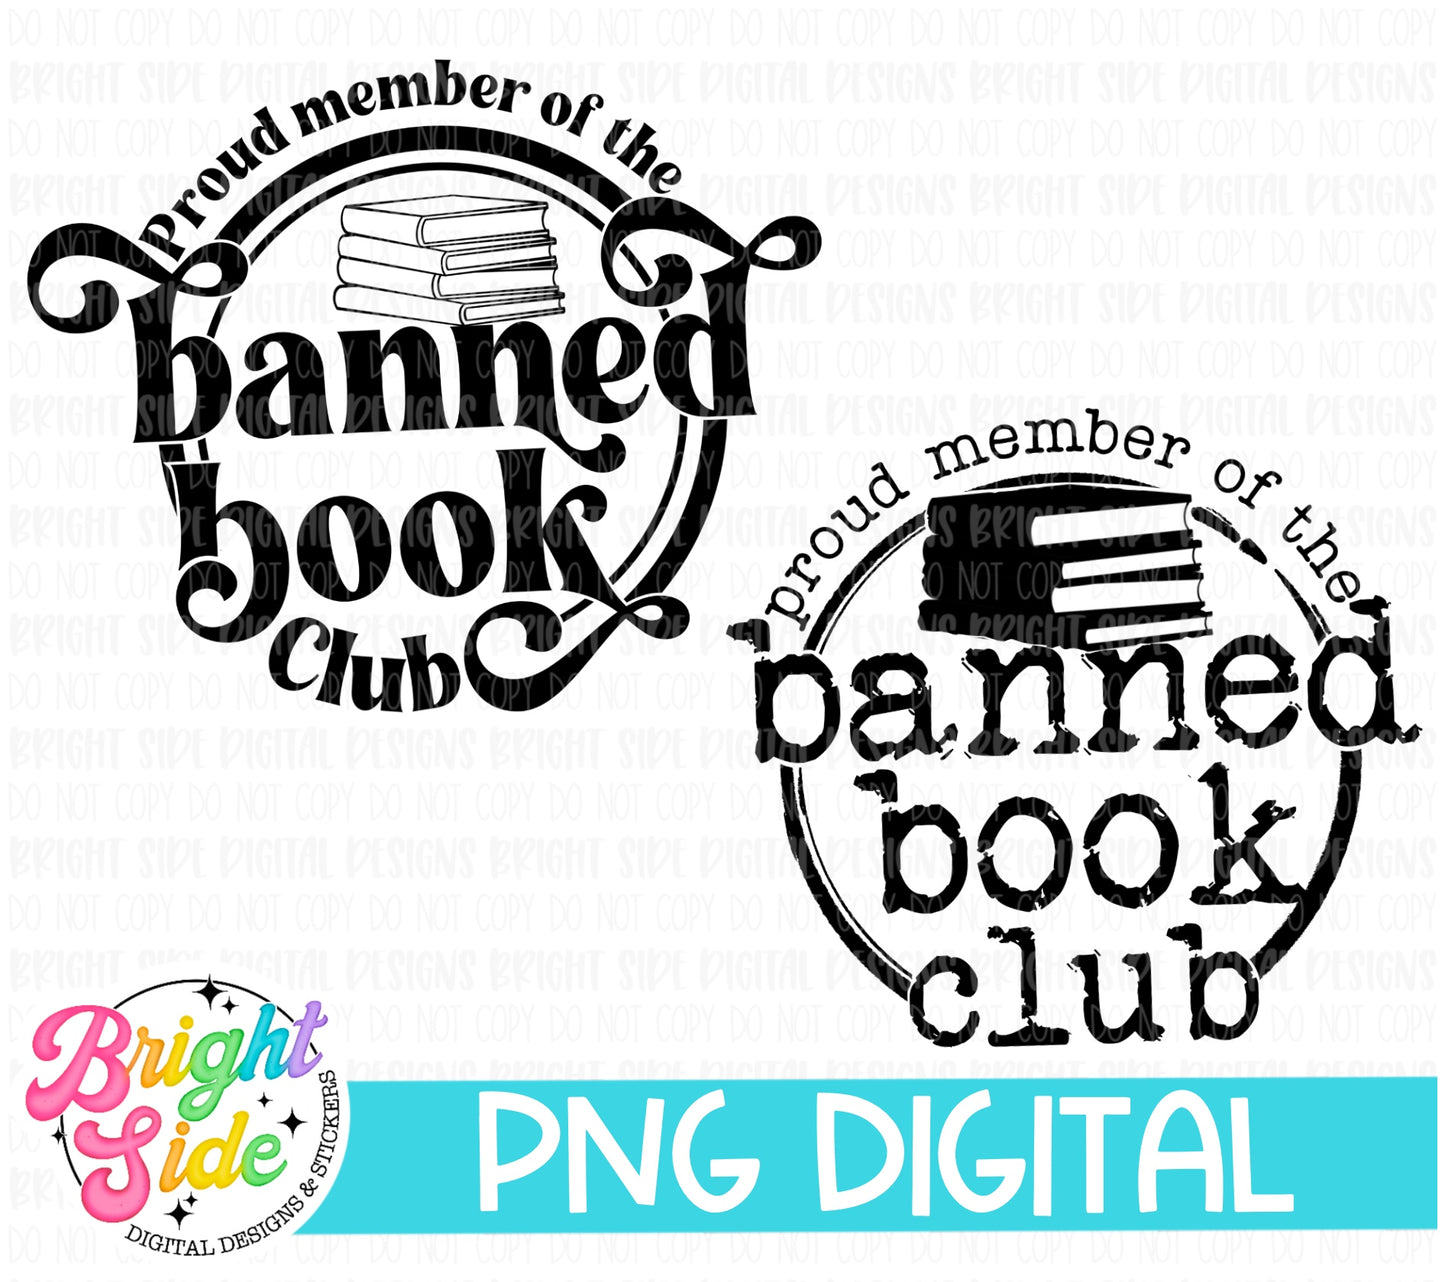 Proud member of the banned book club